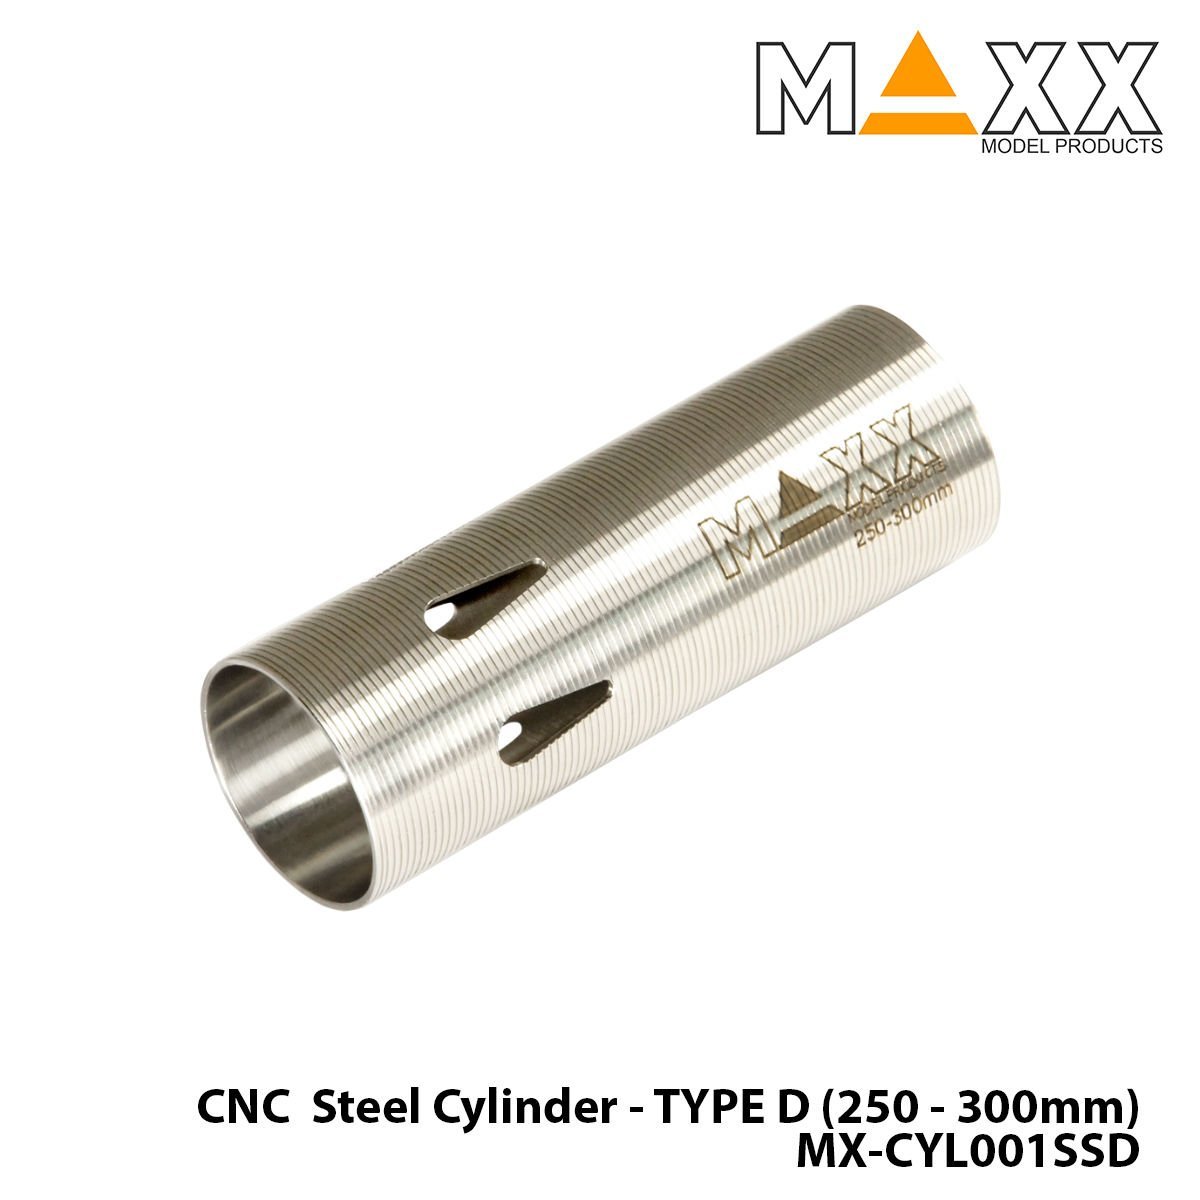 MAXX MODEL CNC Hardened Stainless Steel Cylinder - TYPE D (250 - 300mm) MX-CYL001SSD